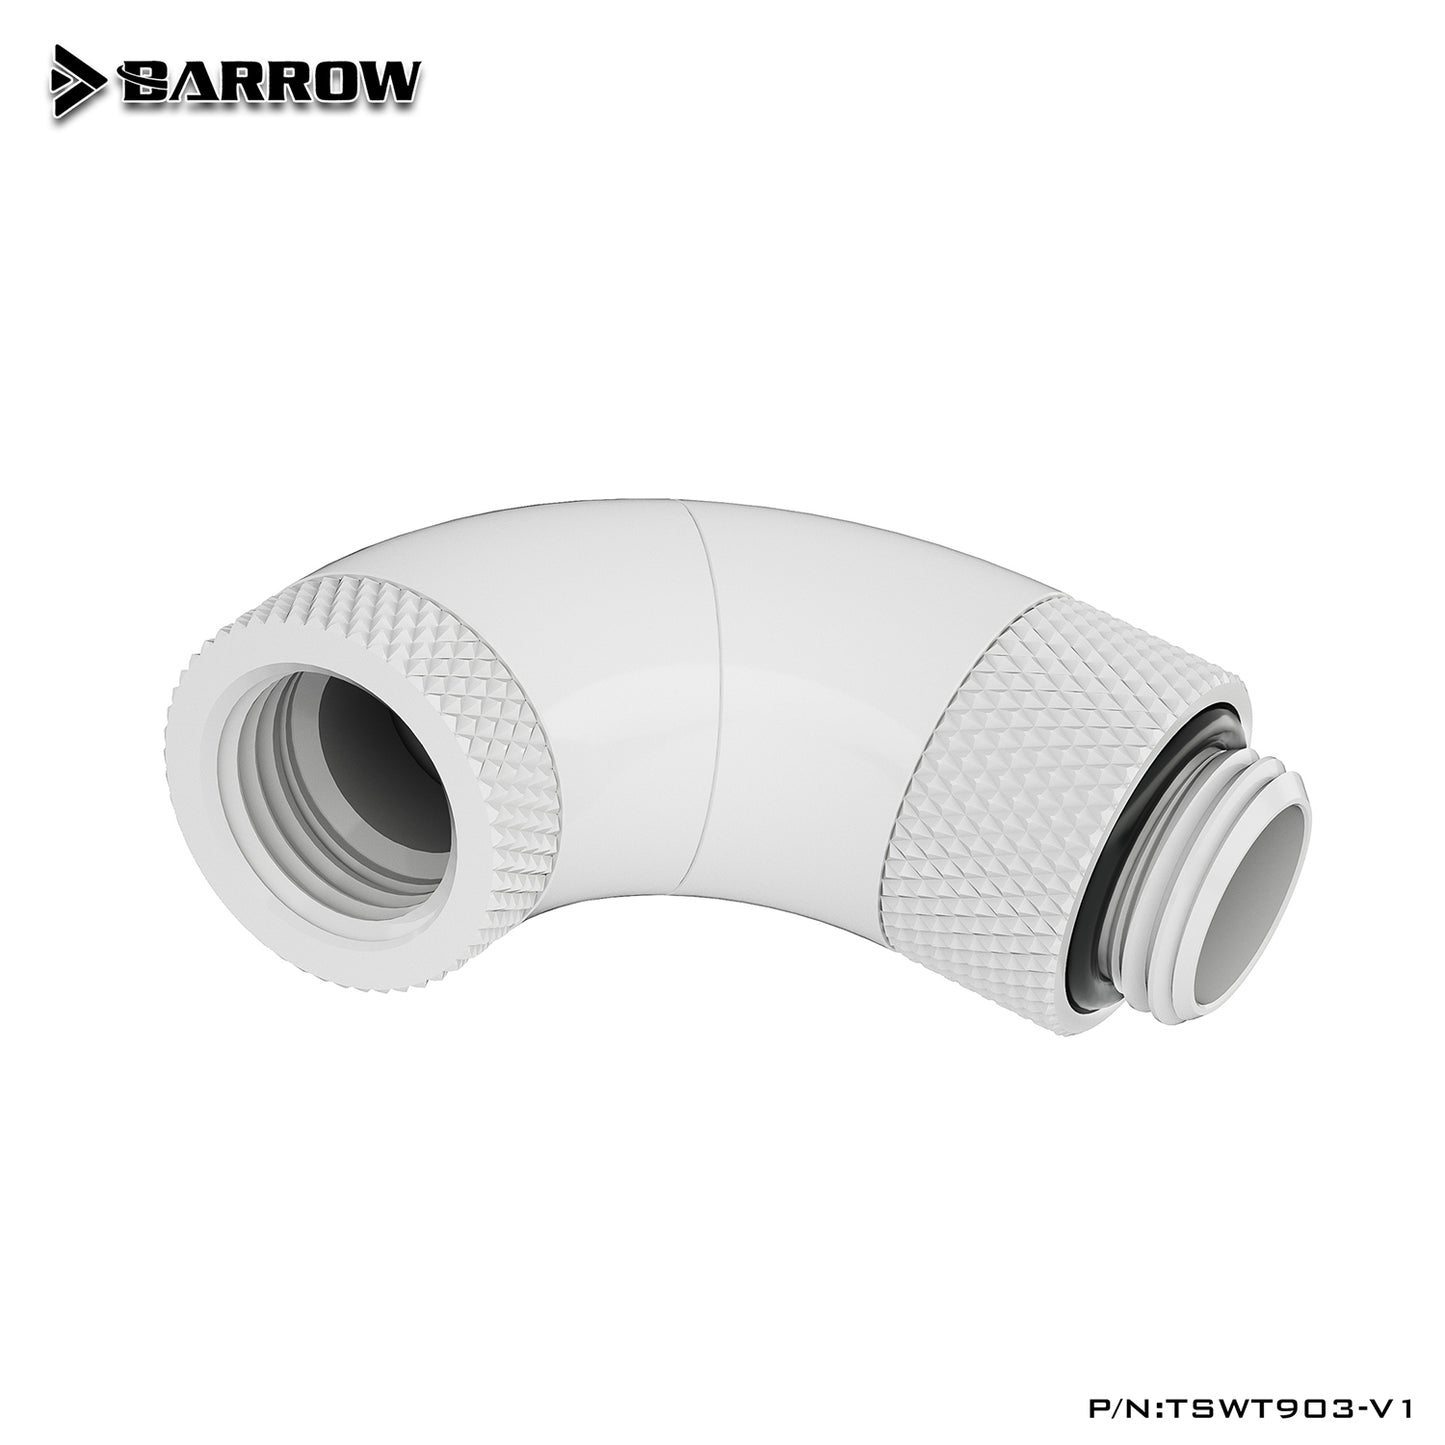 Barrow G1/4" 90-Degree Three-swivel Adapter, 360 Degree Rotatable Extender Water Cooling Fittings,TSWT903-V1